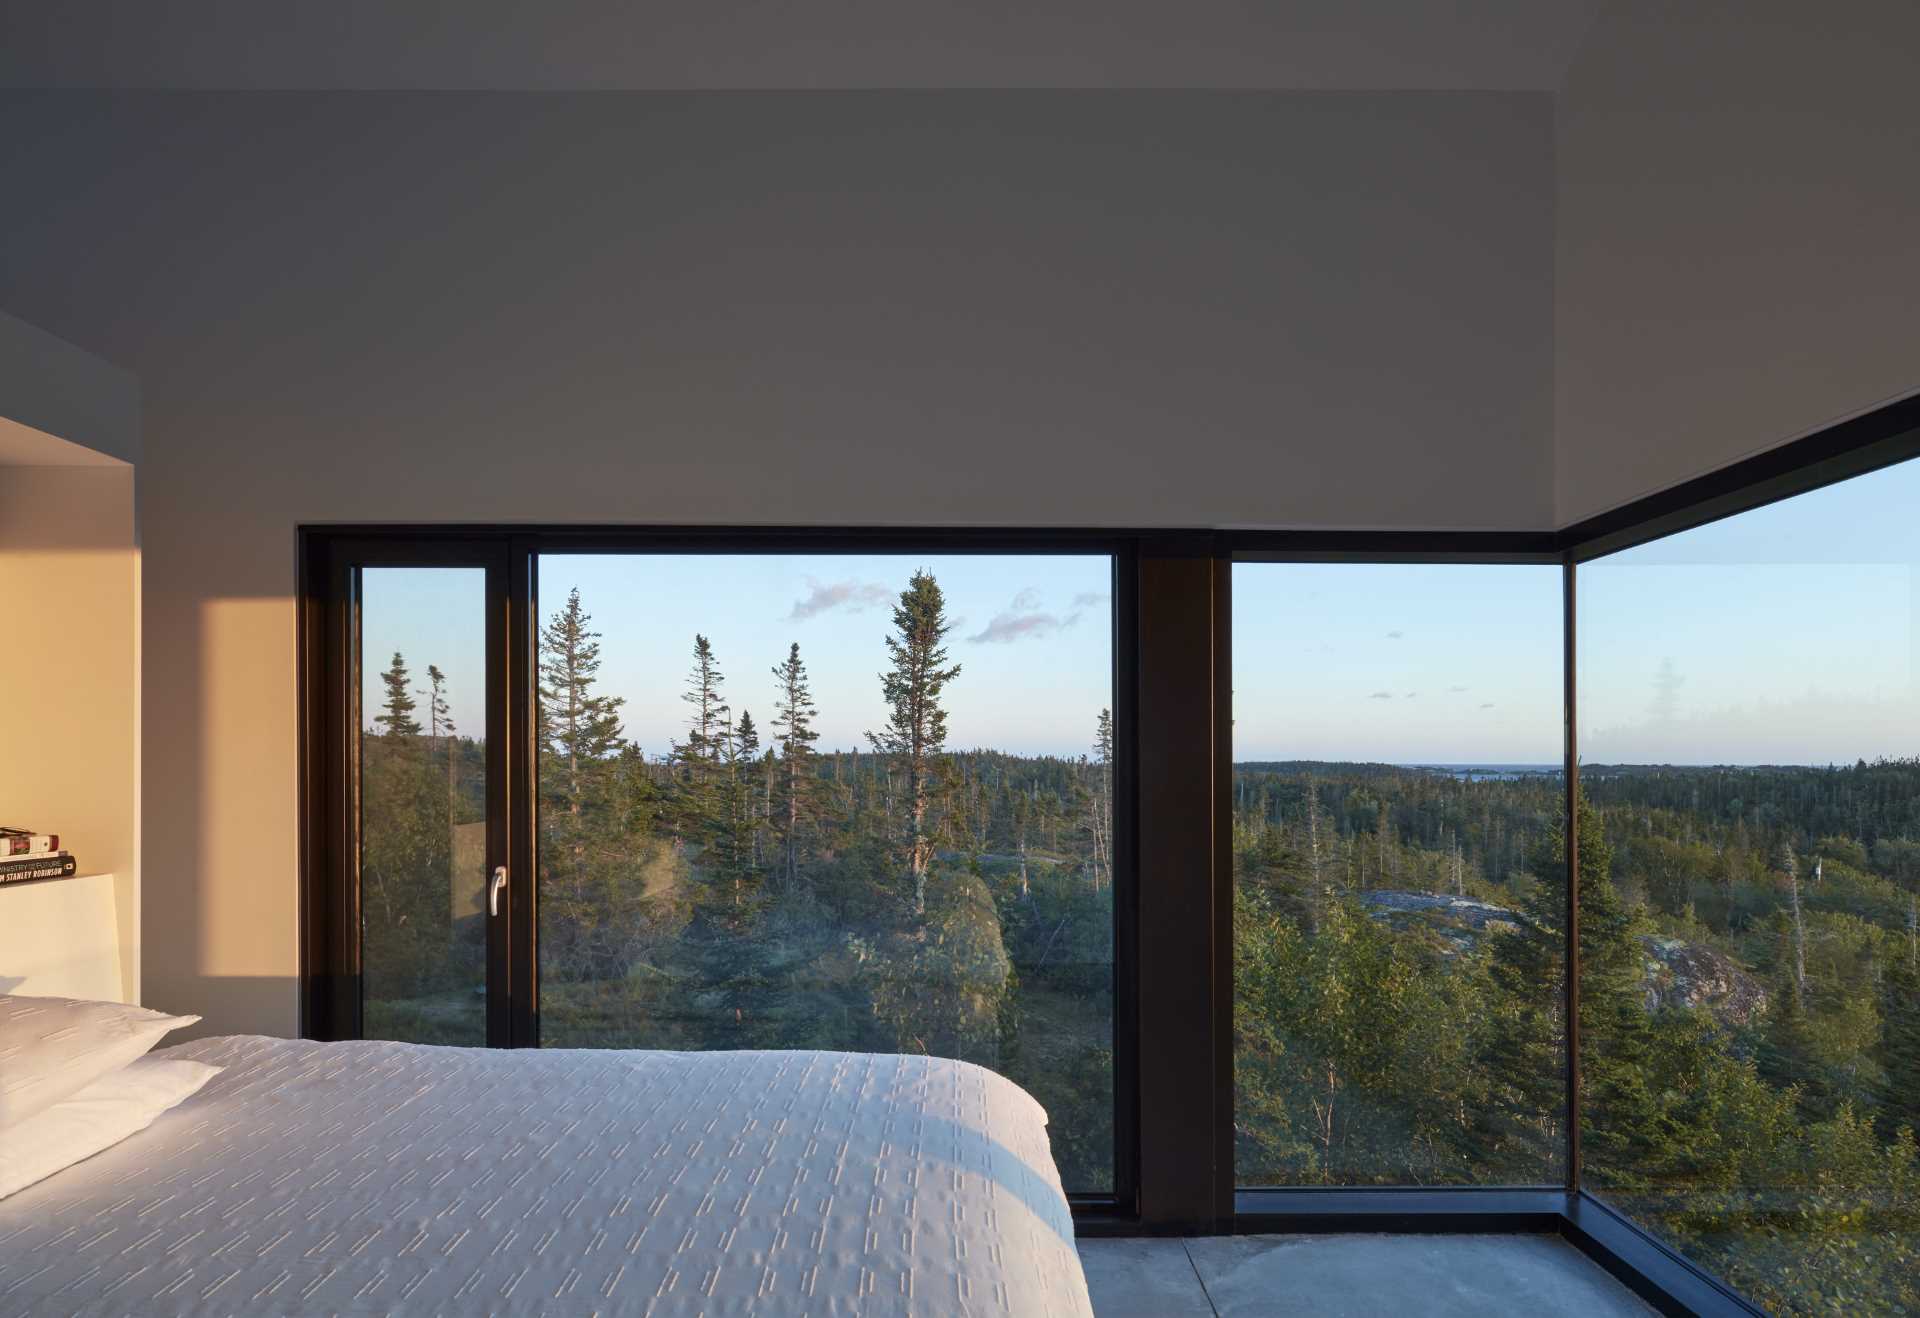 In this modern bedroom, the wrap-around black-framed windows showcase the uninterrupted view of the trees.